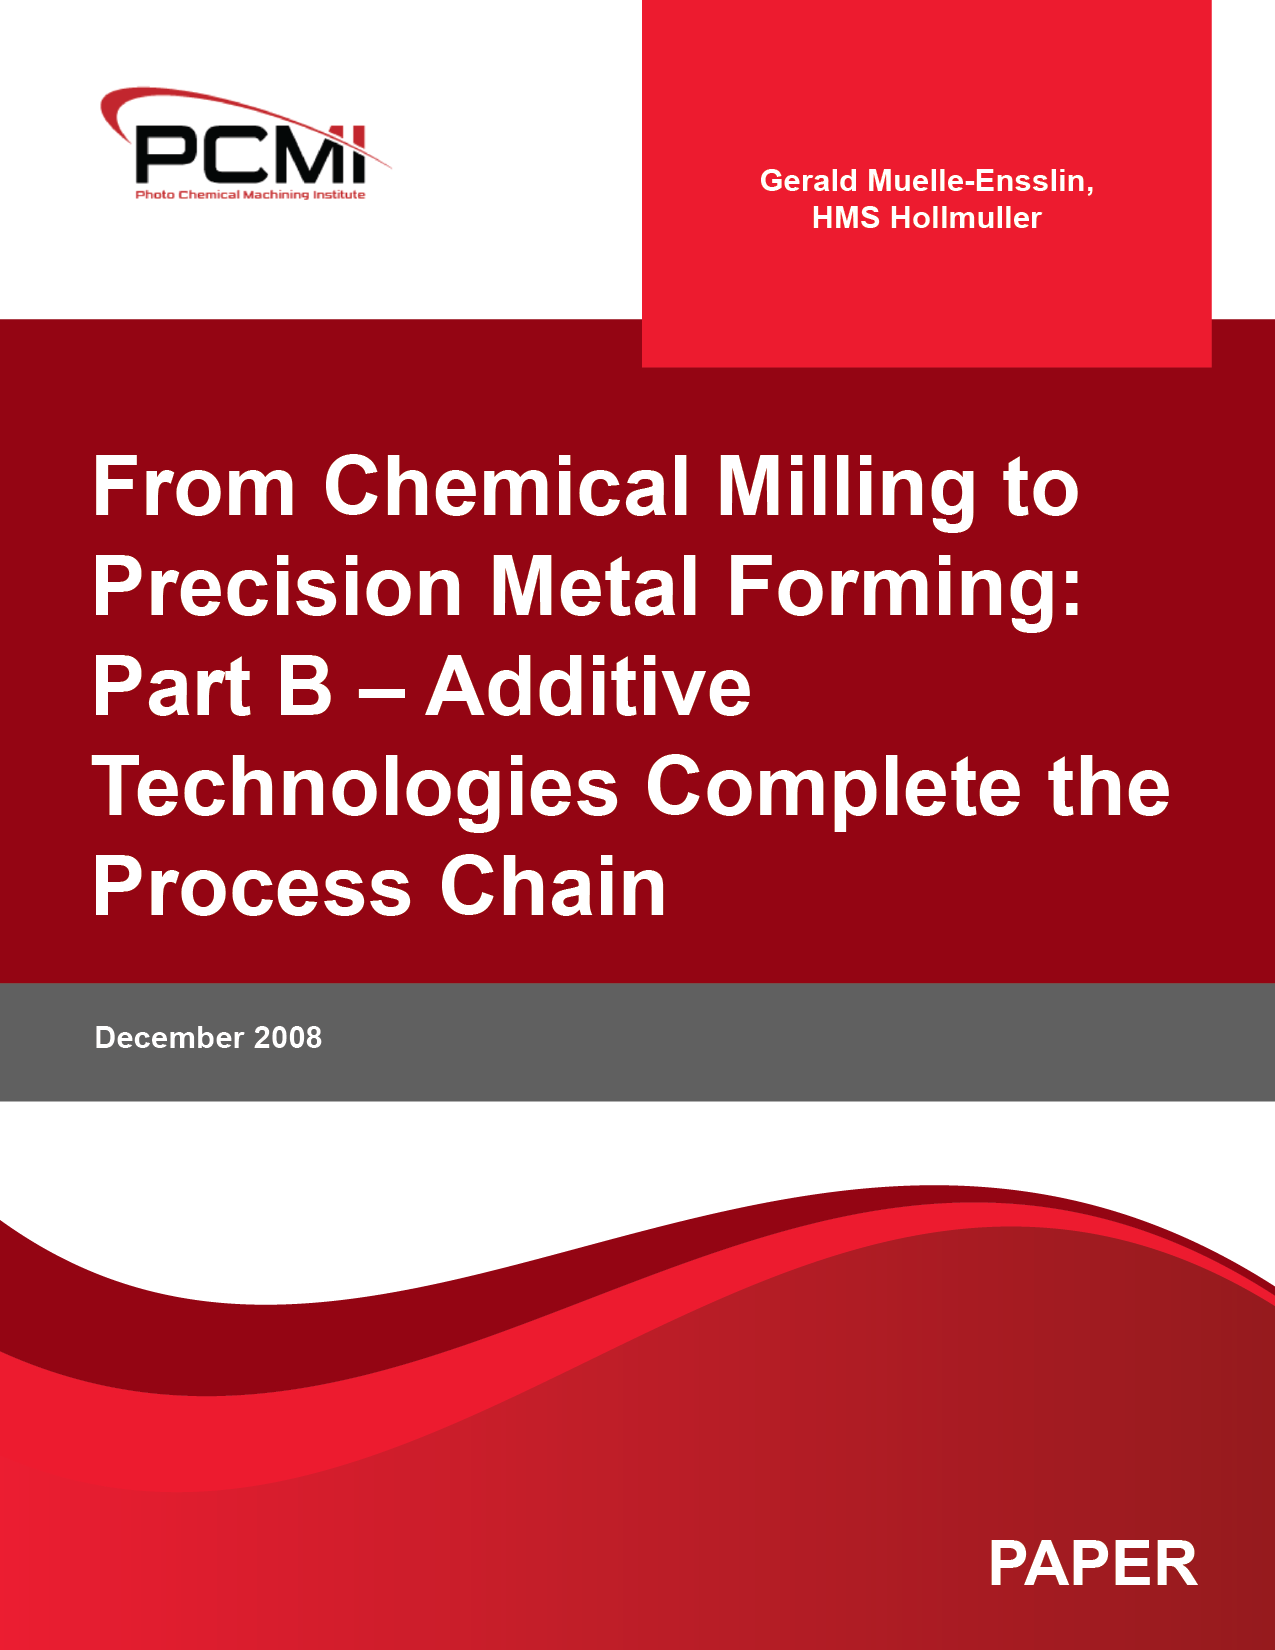 From Chemical Milling to Precision Metal Forming: Part B – Additive Technologies Complete the Process Chain